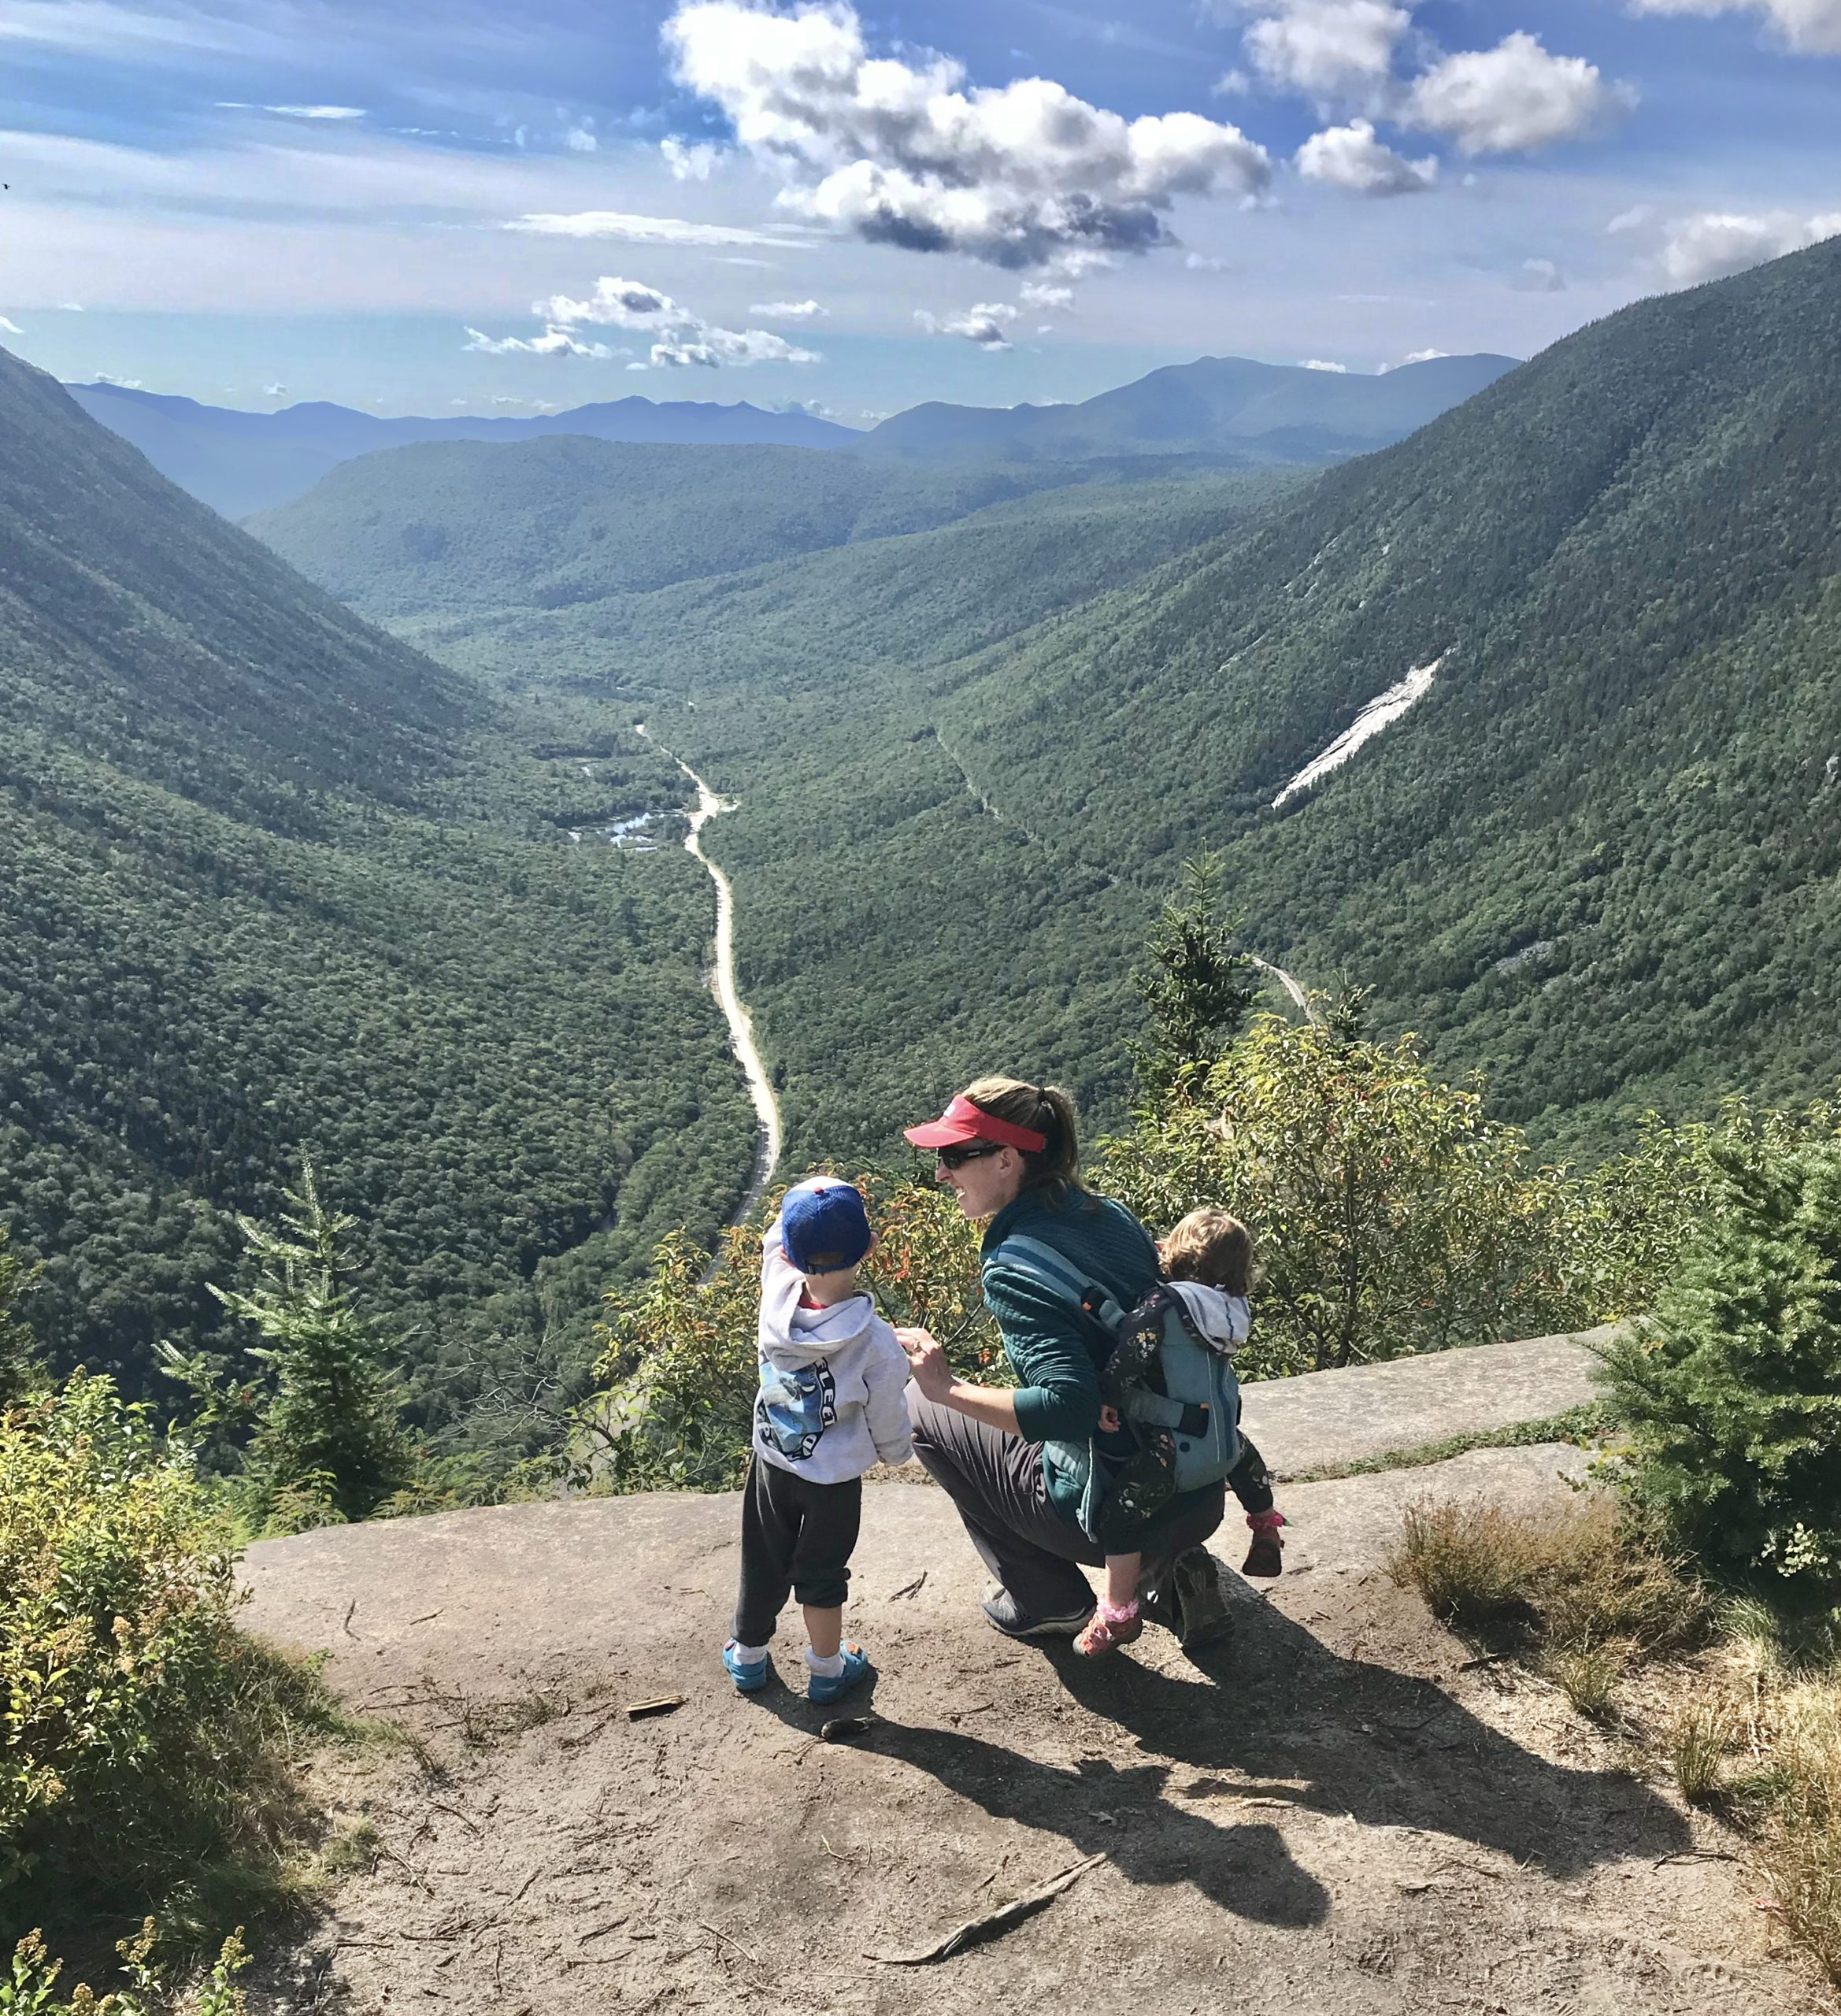 The Best White Mountain Hikes with Kids and Dogs